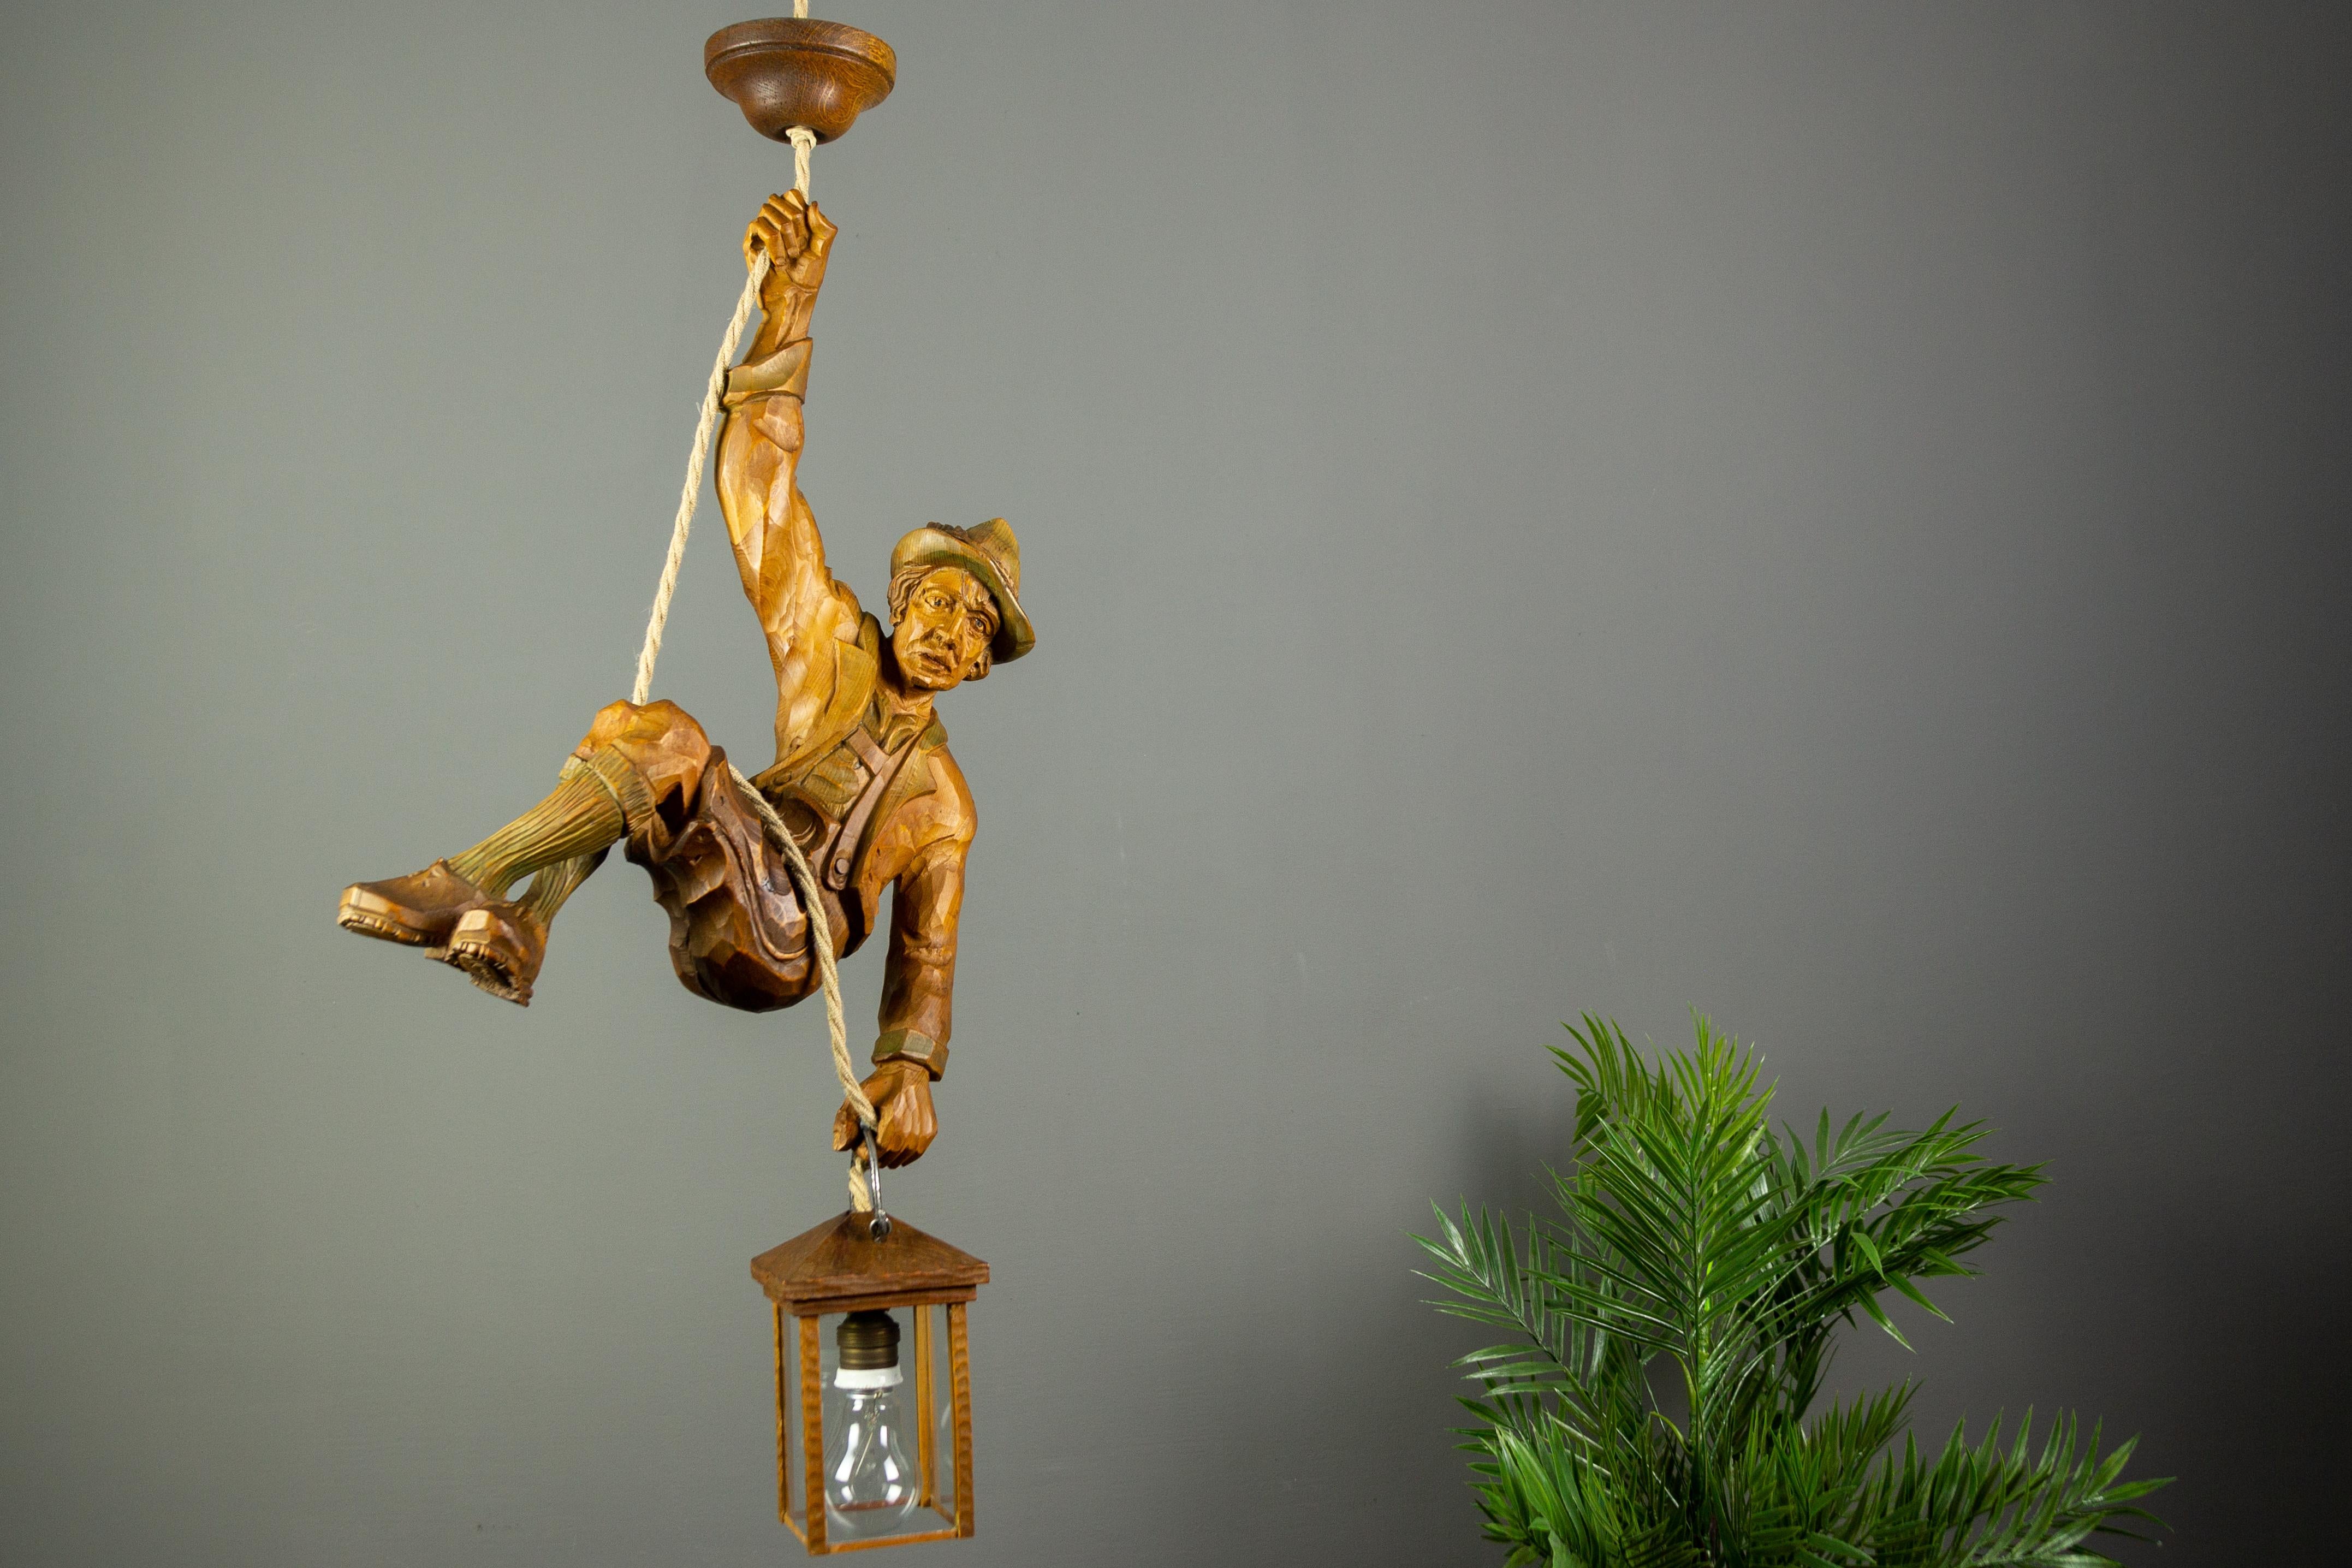 Wonderful German figural pendant lamp features a large hand-carved figure of a mountain climber. The detailed carved wooden mountaineer is holding onto a rope and holding a wooden lantern in one hand. The figure is lightly toned in green and brown